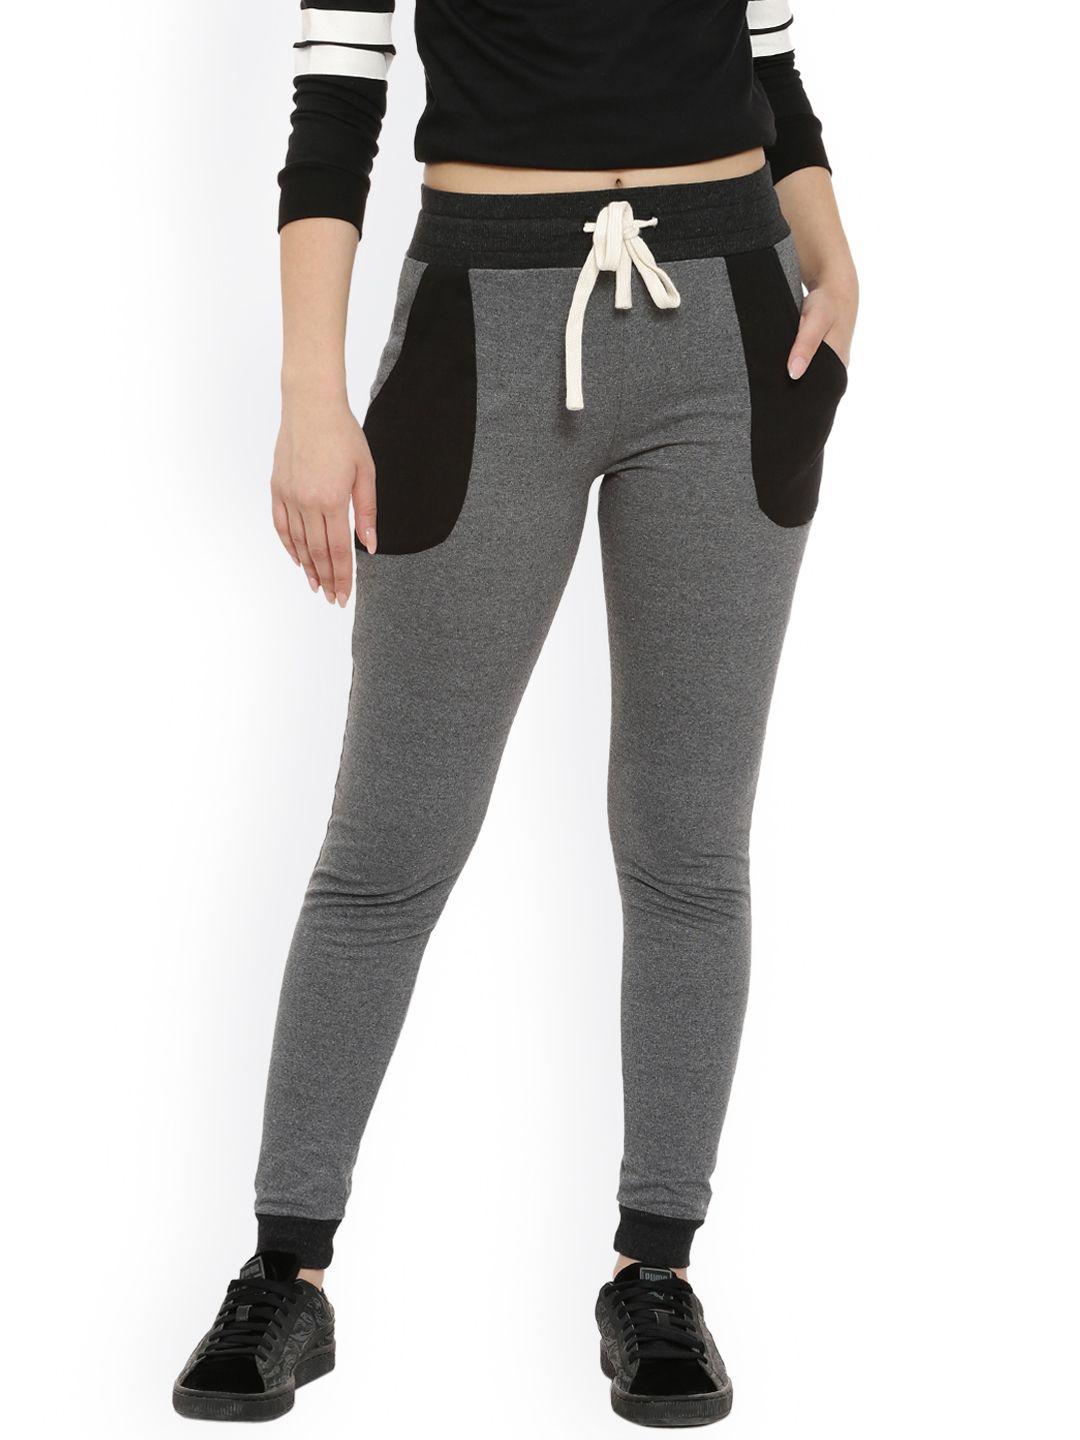 campus-sutra-women-charcoal-track-pants